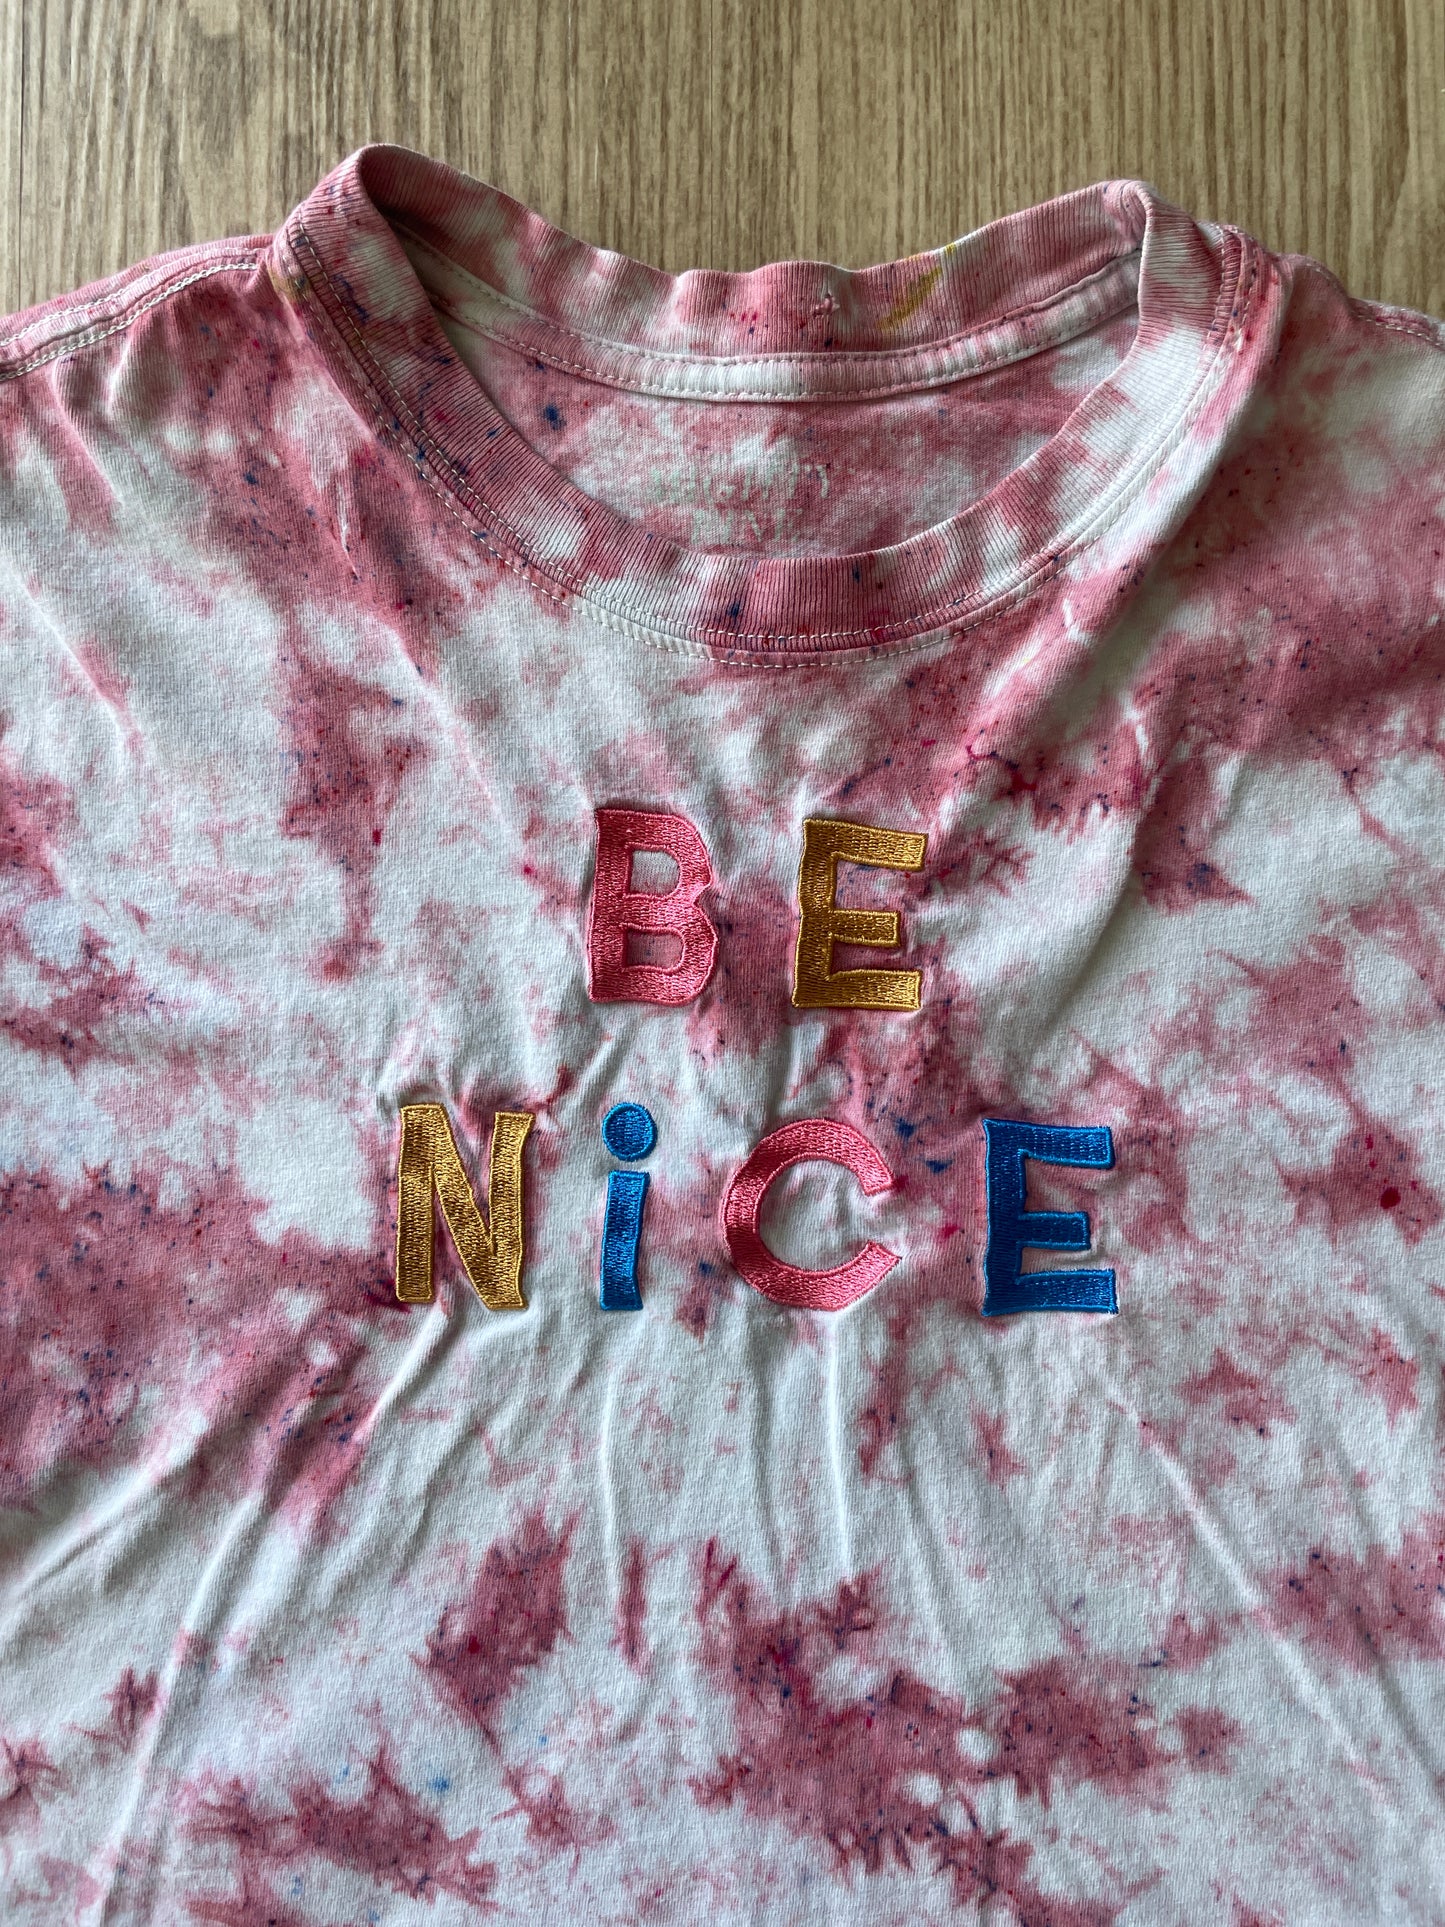 XS/S Women’s BE NICE Handmade Tie Dye Cropped T-Shirt | One-Of-a-Kind Pastel Pink Short Sleeve Crop Top